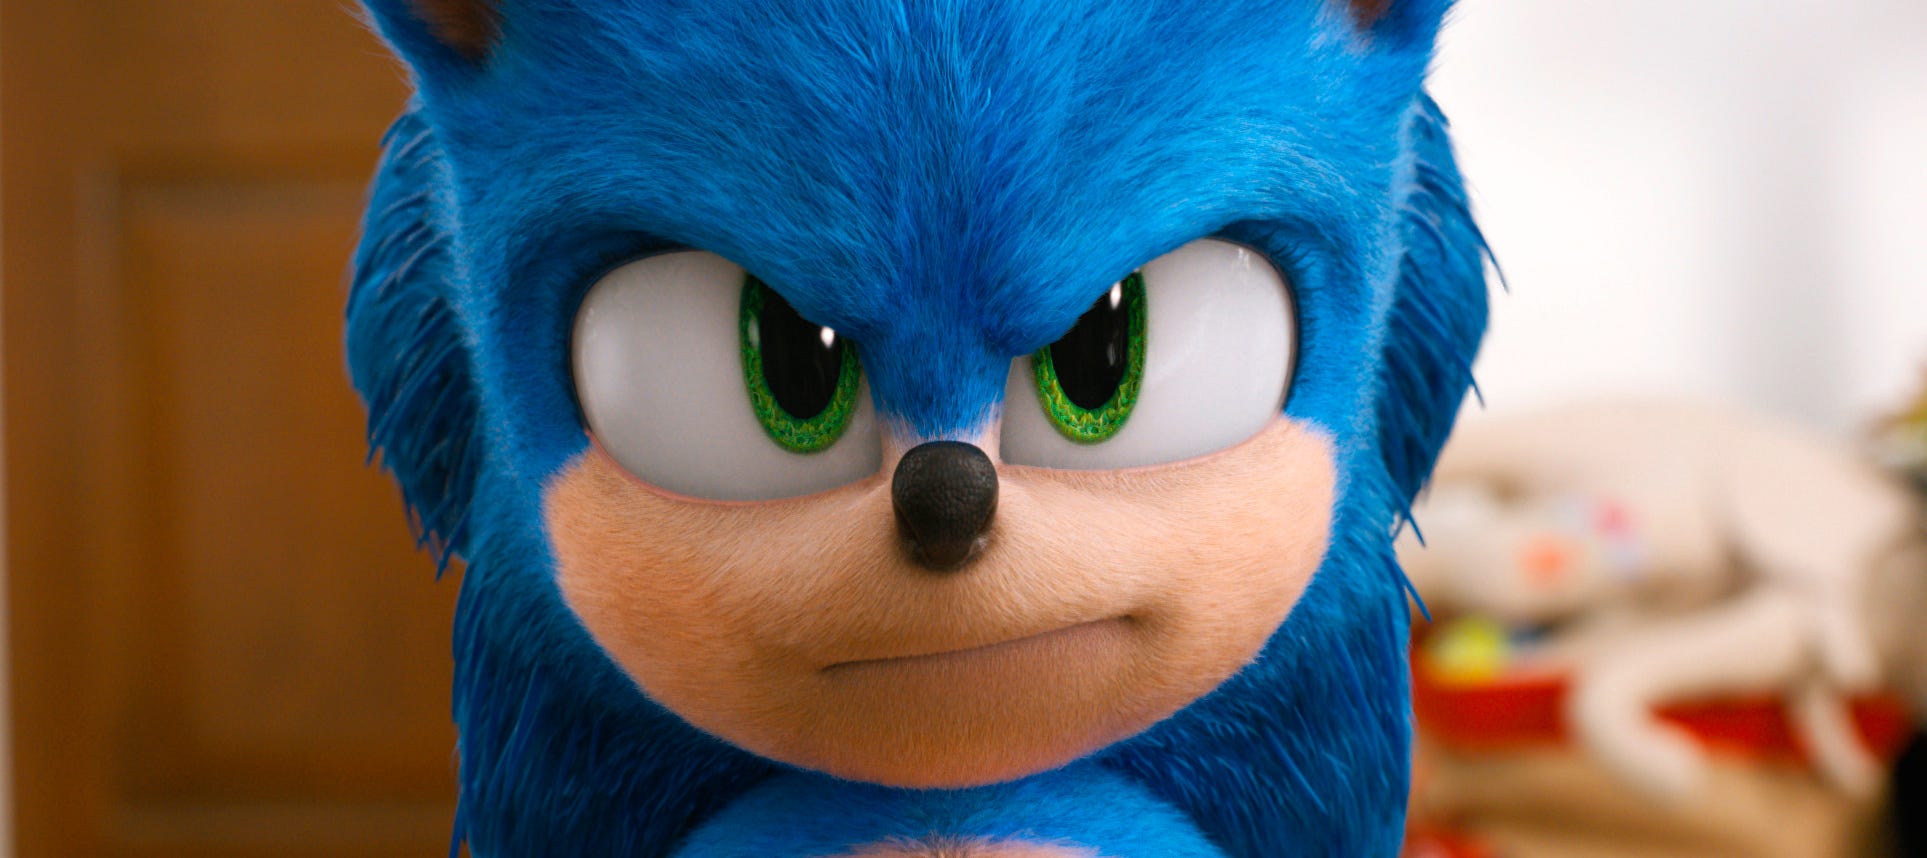 when is sonic the hedgehog 2 coming out